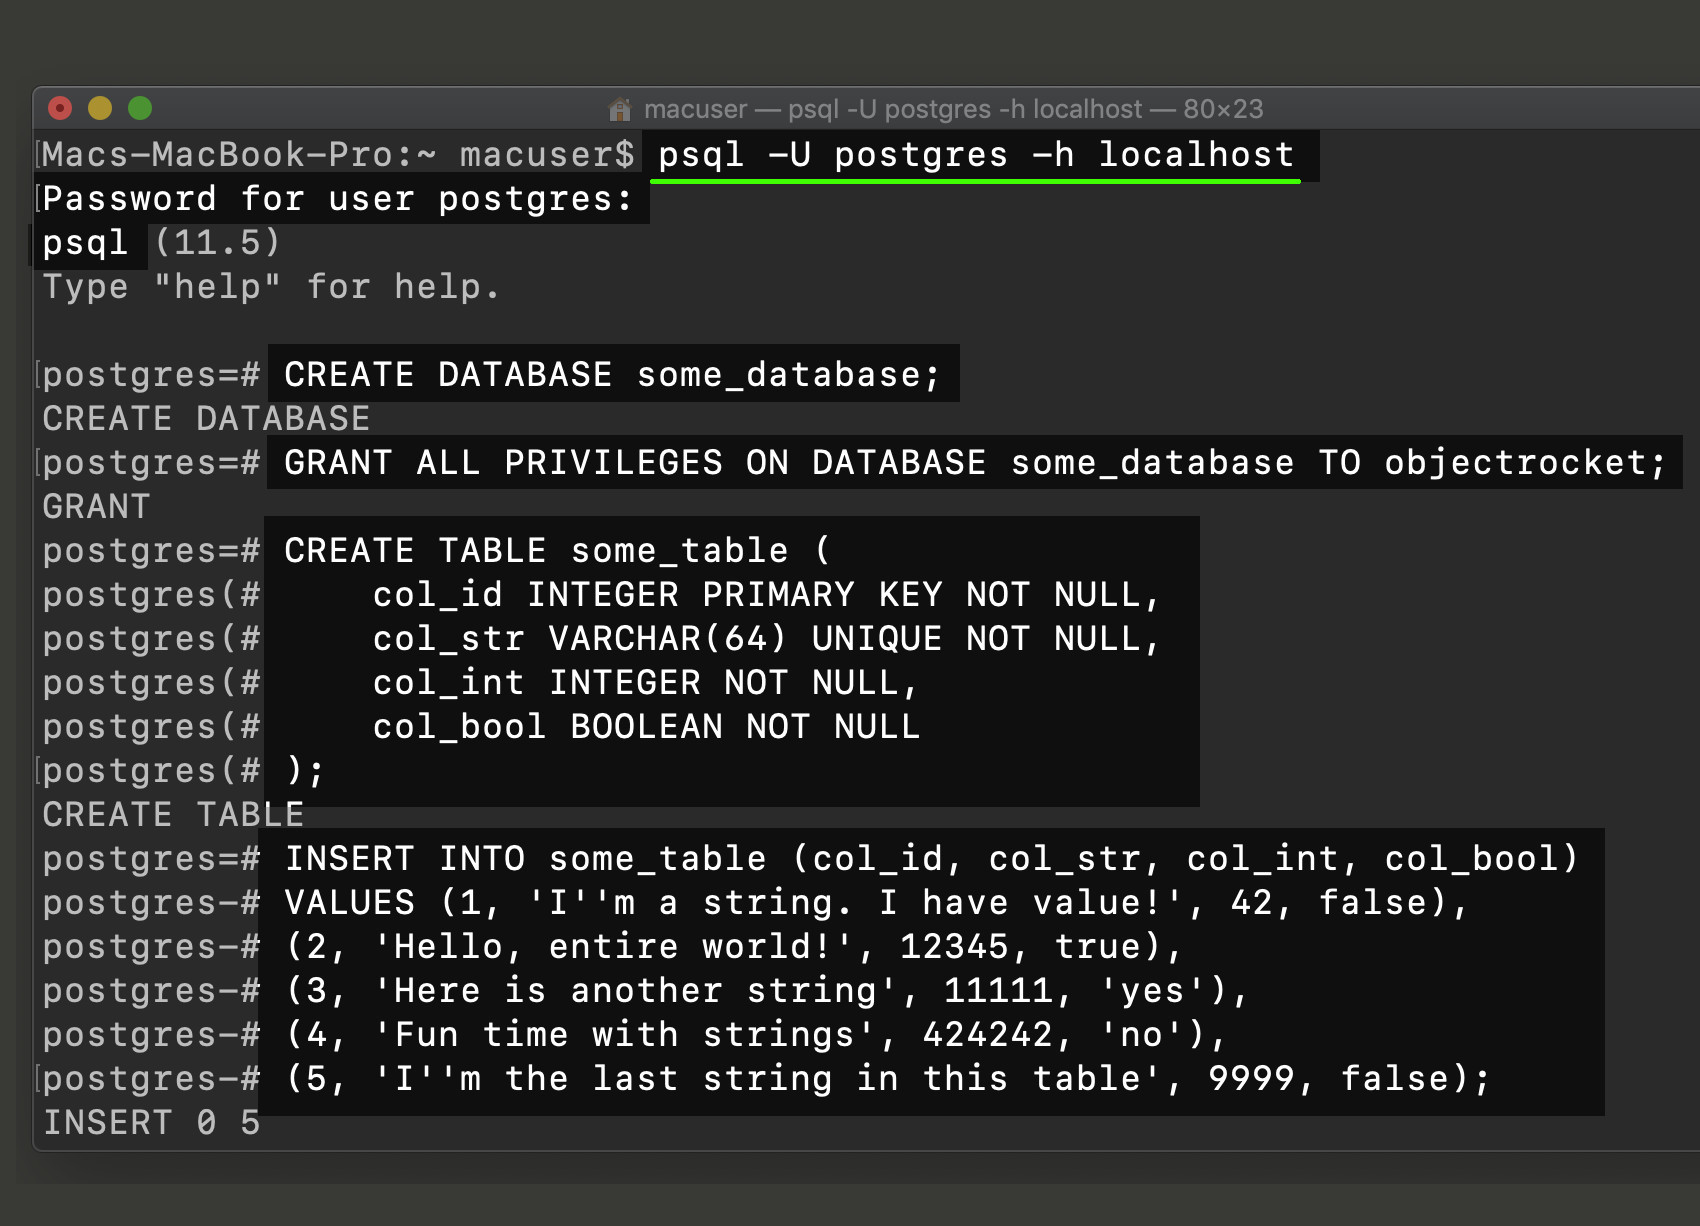 Entering into psql command line and creating a PostgreSQL database and table and insert data rows